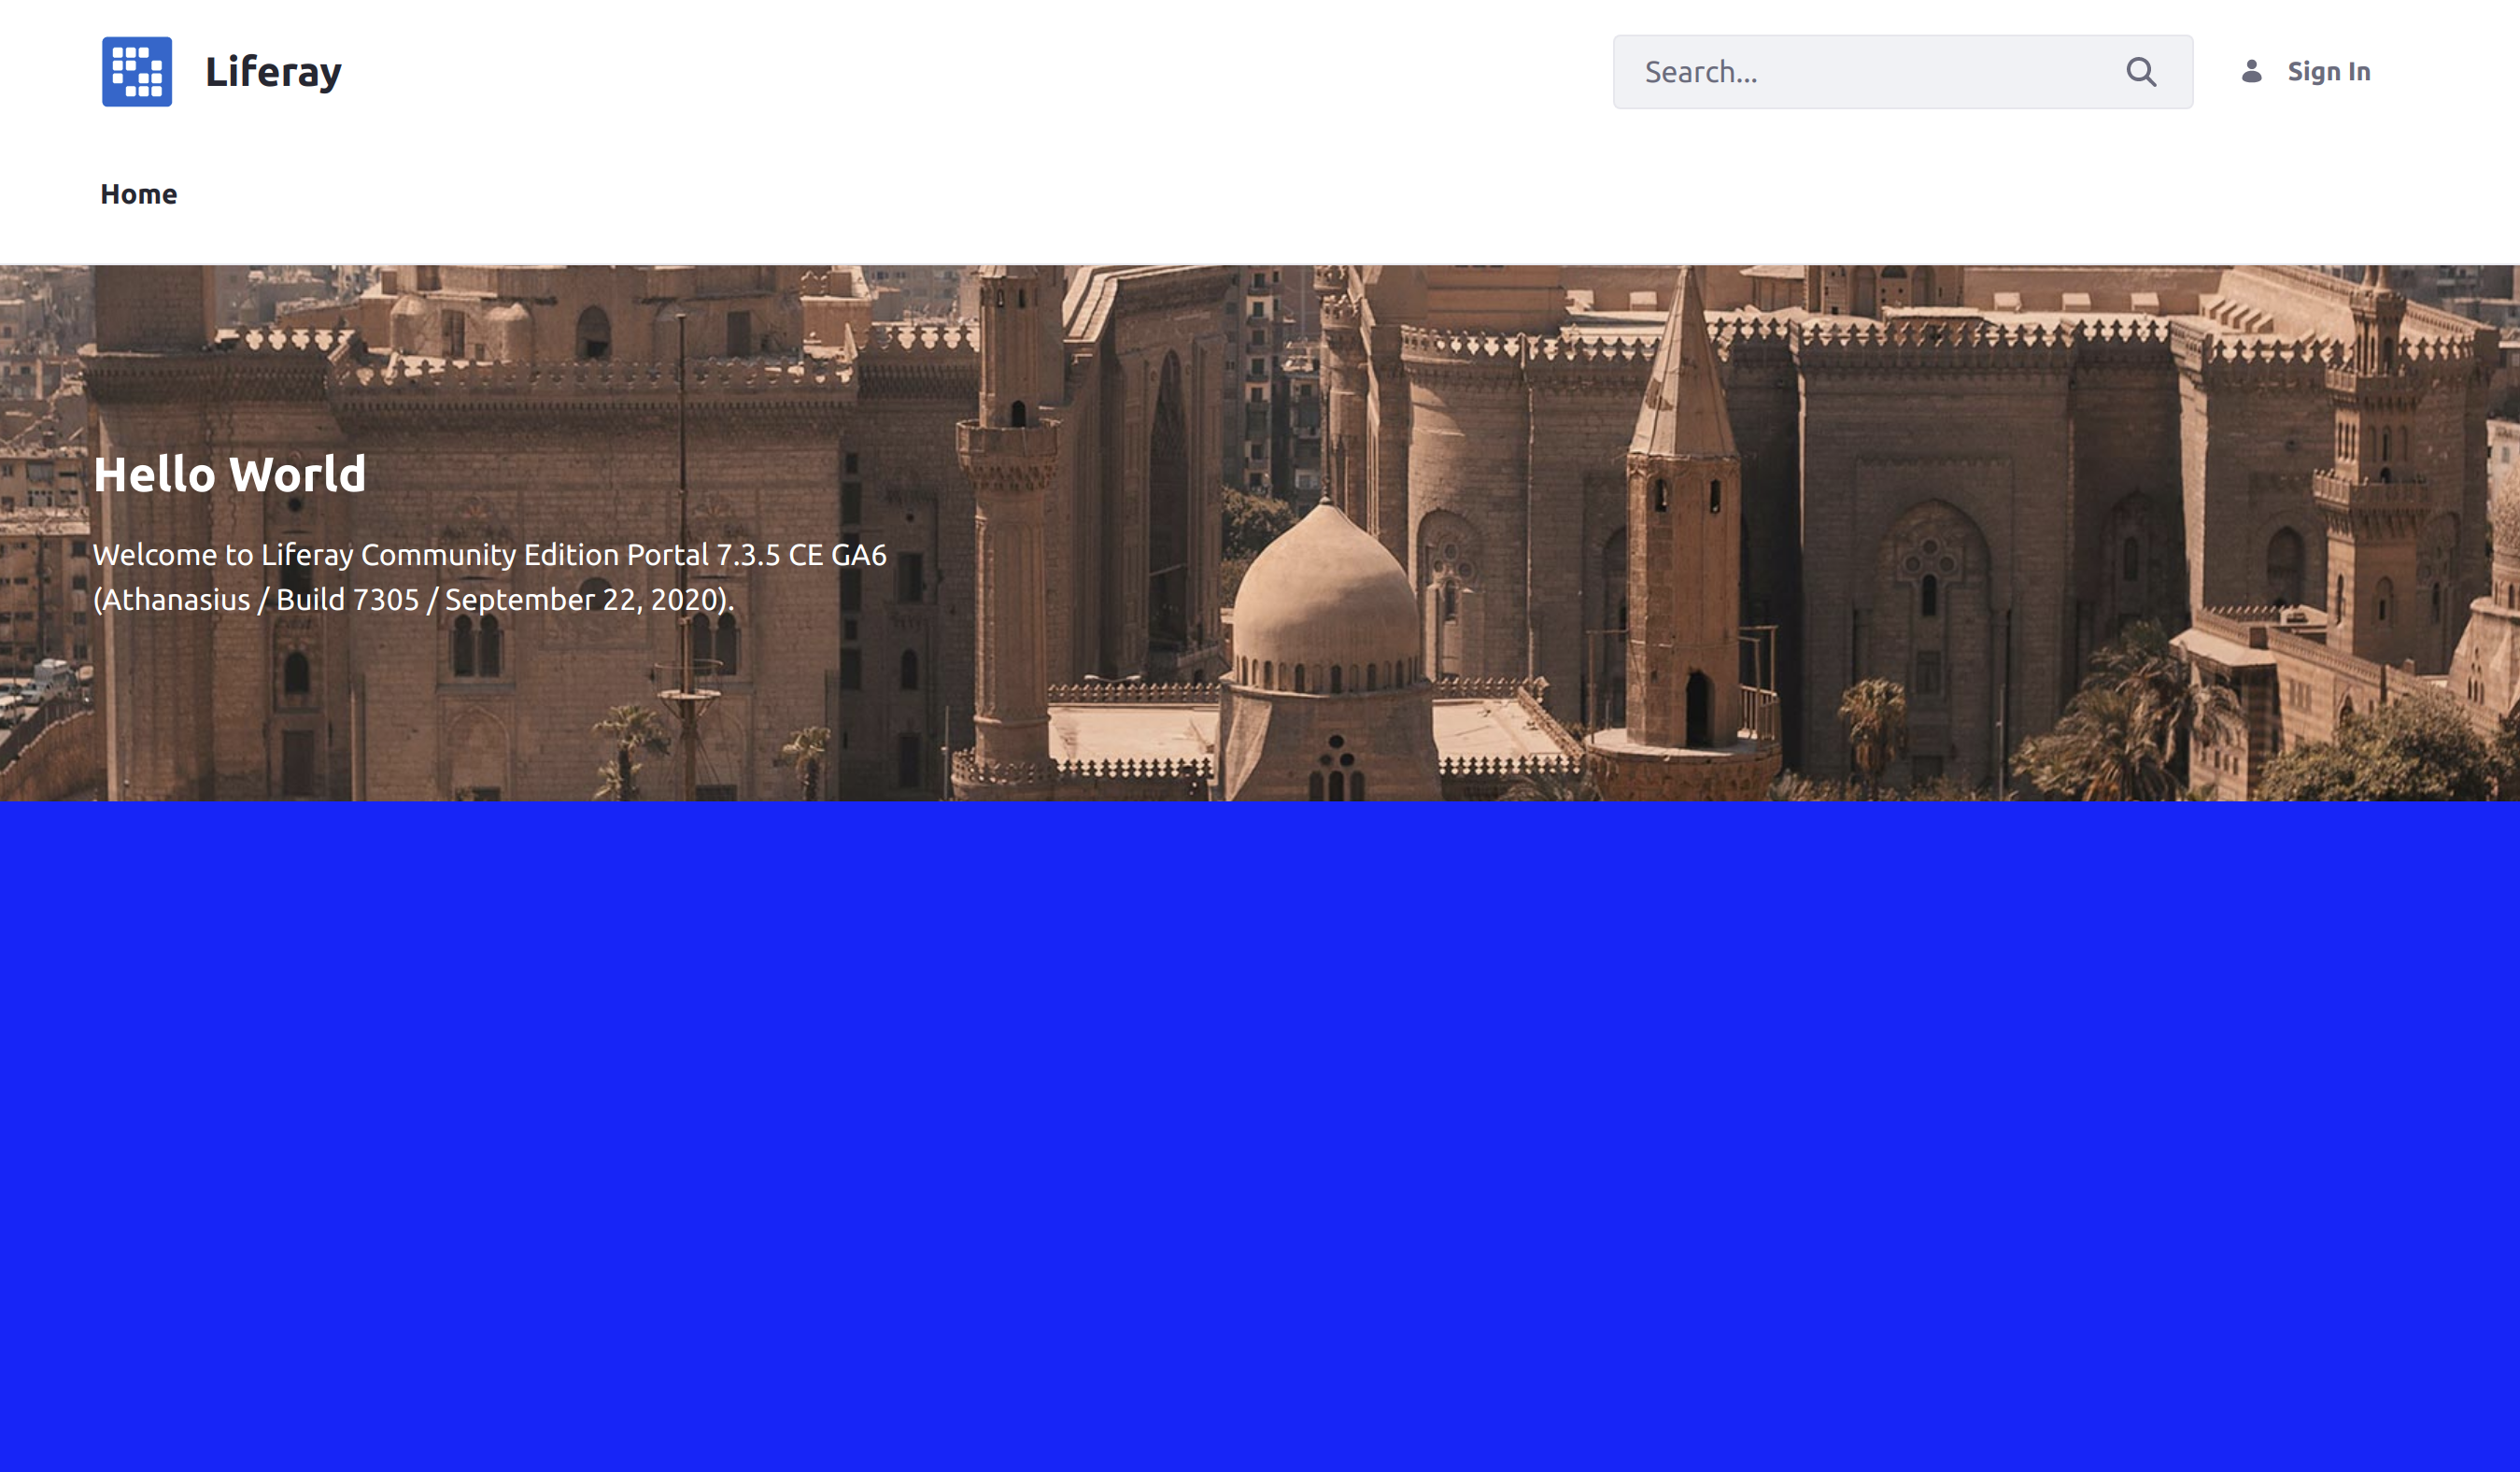 The example theme contributor makes the page's background turn blue.